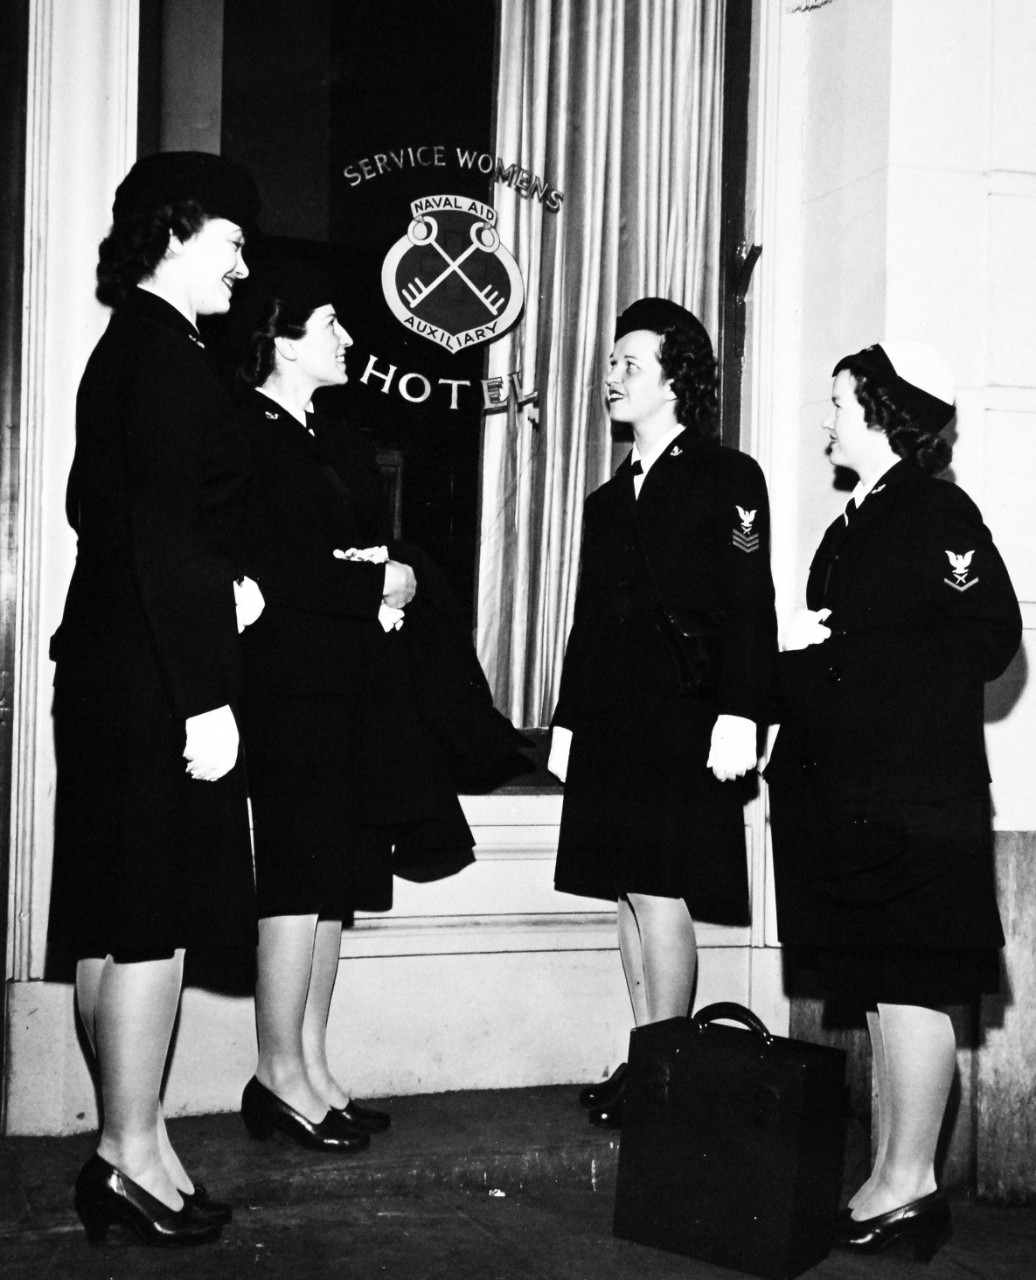 80-G-300971:  Service Dress Blue, January 1945.   Group of WAVES at new Naval Aid Auxiliary Hotel for Women at 20 Jones Street, San Francisco, California. Shown (left to right): SP2c Emily Browne; Y3c Jennie Dolish; Y1c Annette Smith; and Y3c Frankie Shropshire.  Photograph released January 29, 1945.  Official U.S. Navy photograph, now in the collections of the National Archives.  